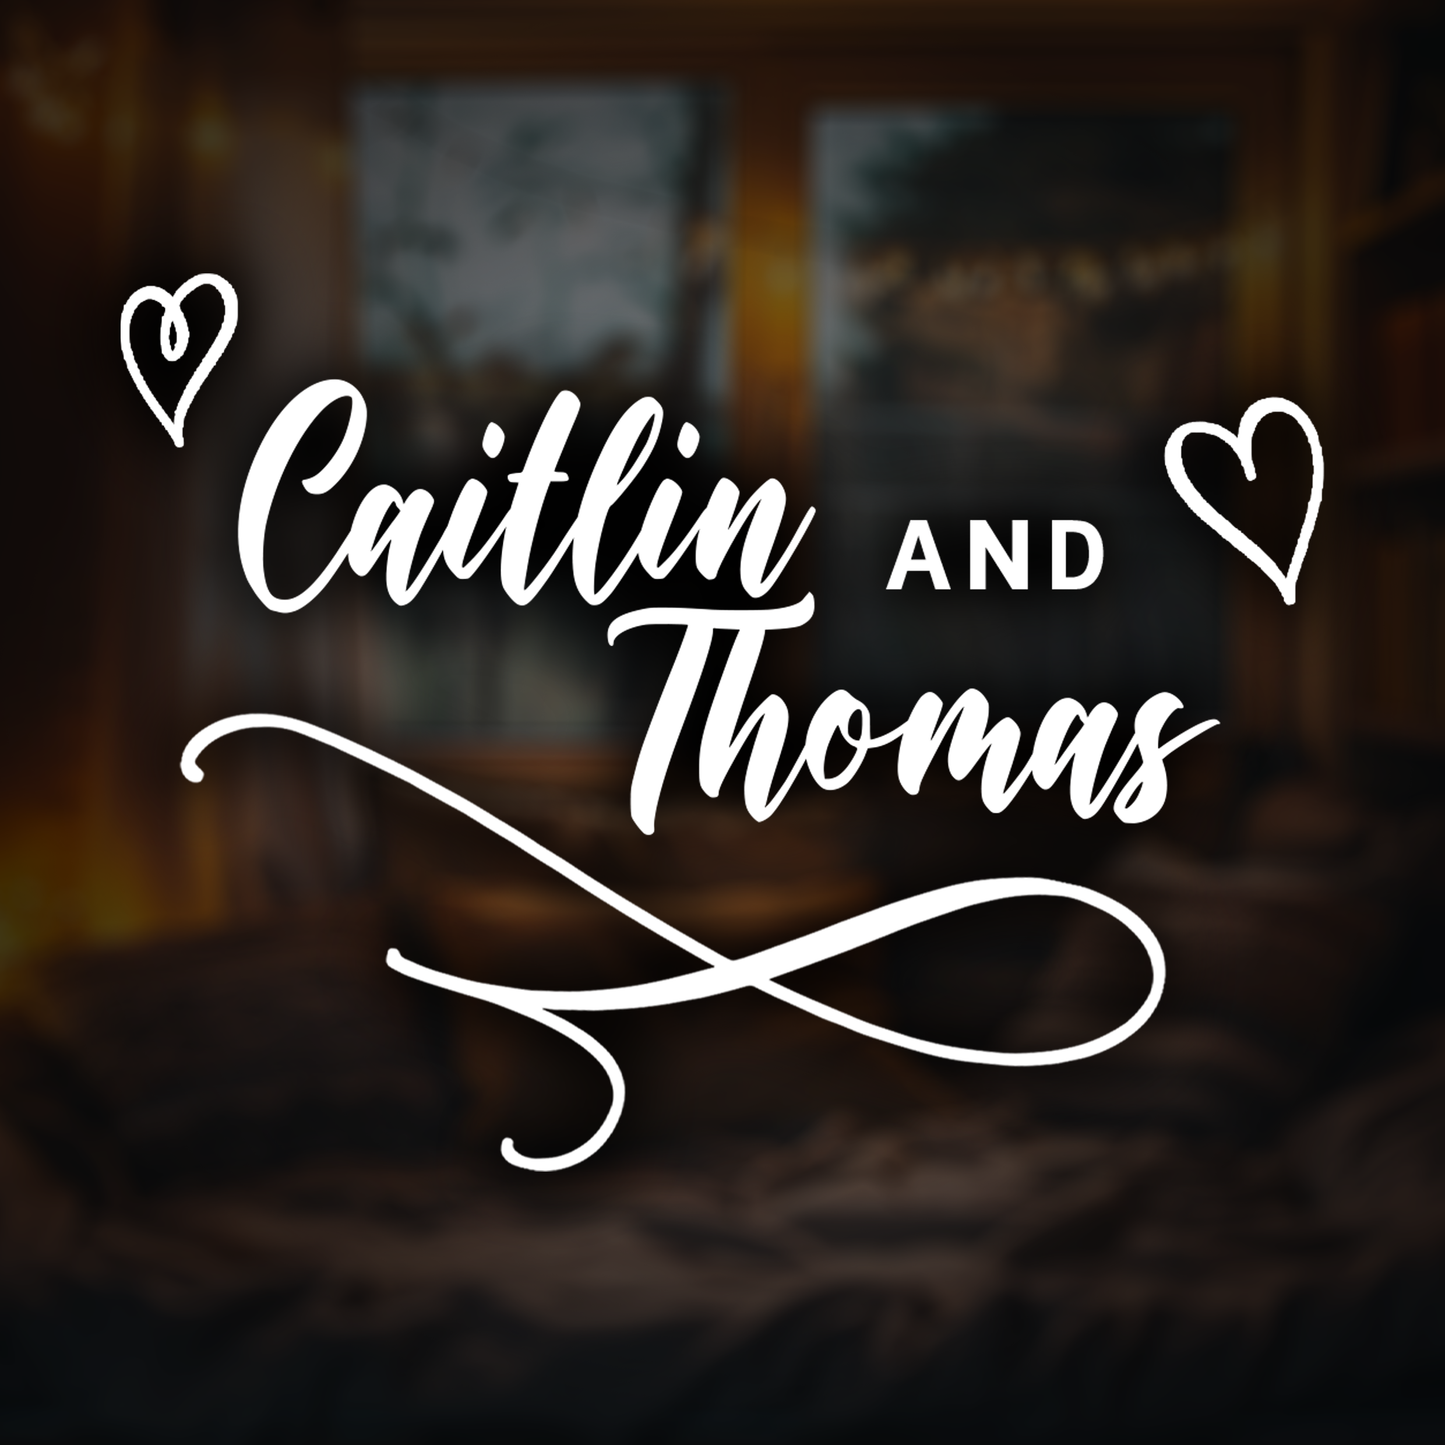 Couple Names With Hearts Custom Wall Sticker Decal